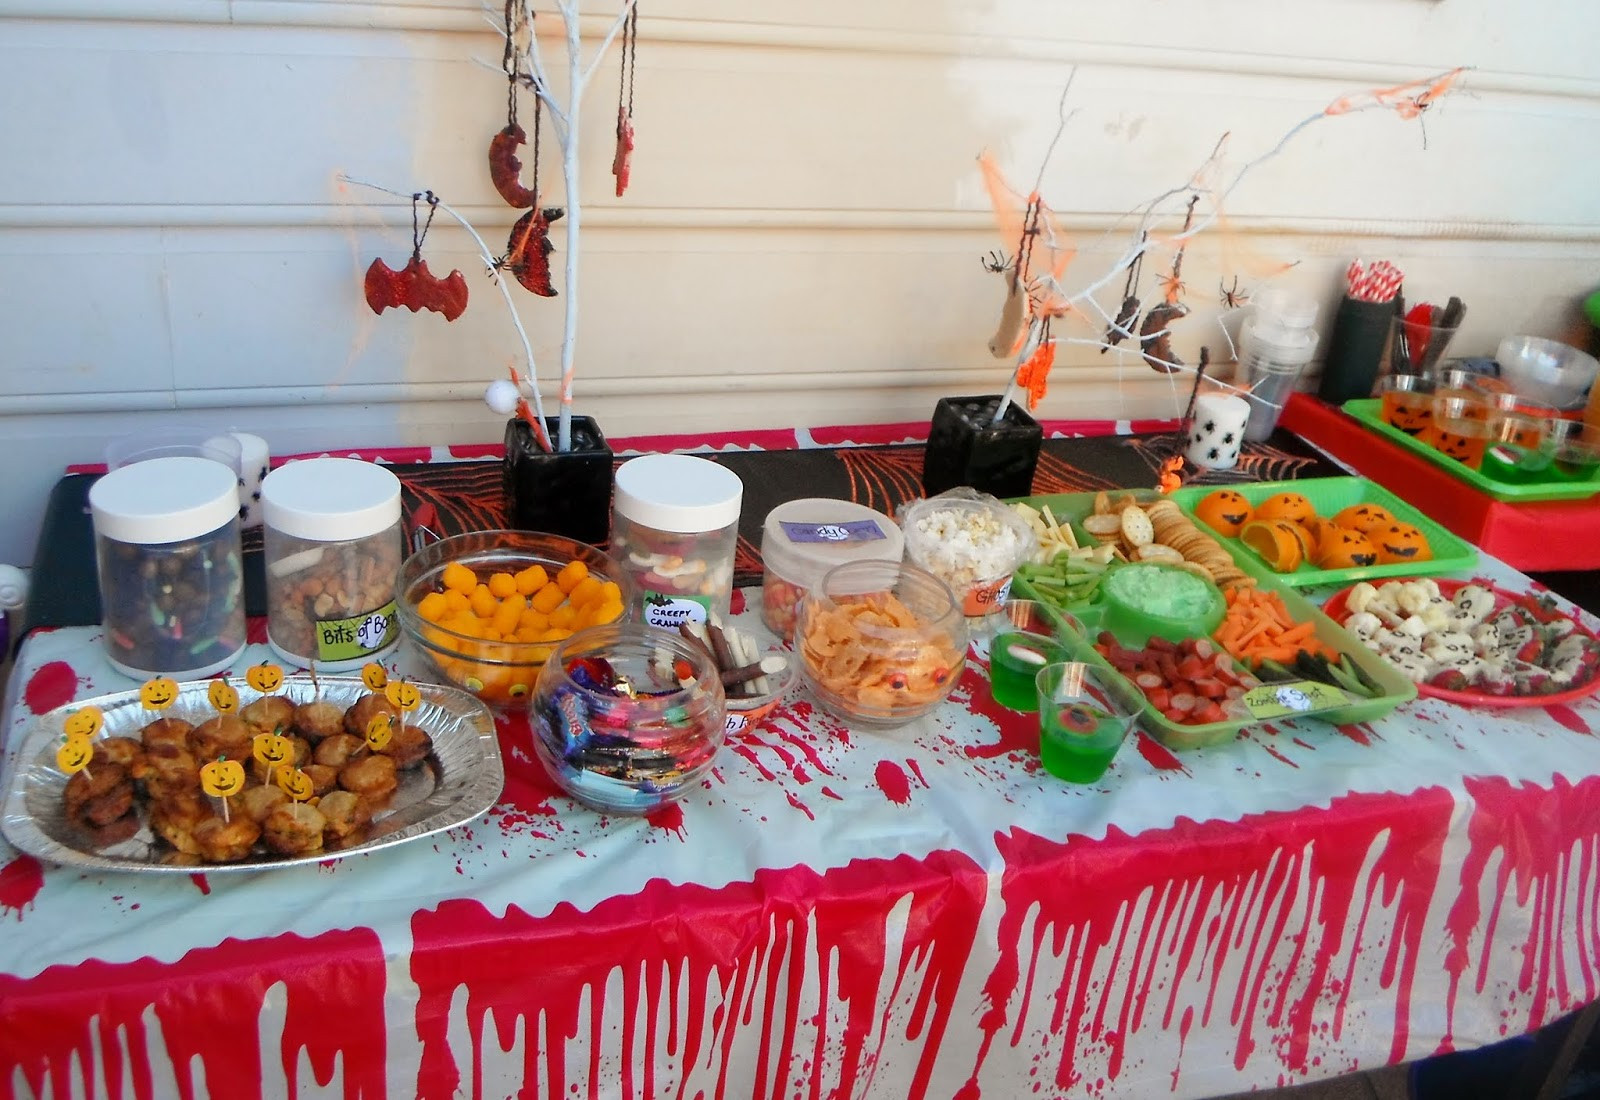 Halloween Food Ideas For A Party
 Adventures at home with Mum Halloween Party Food